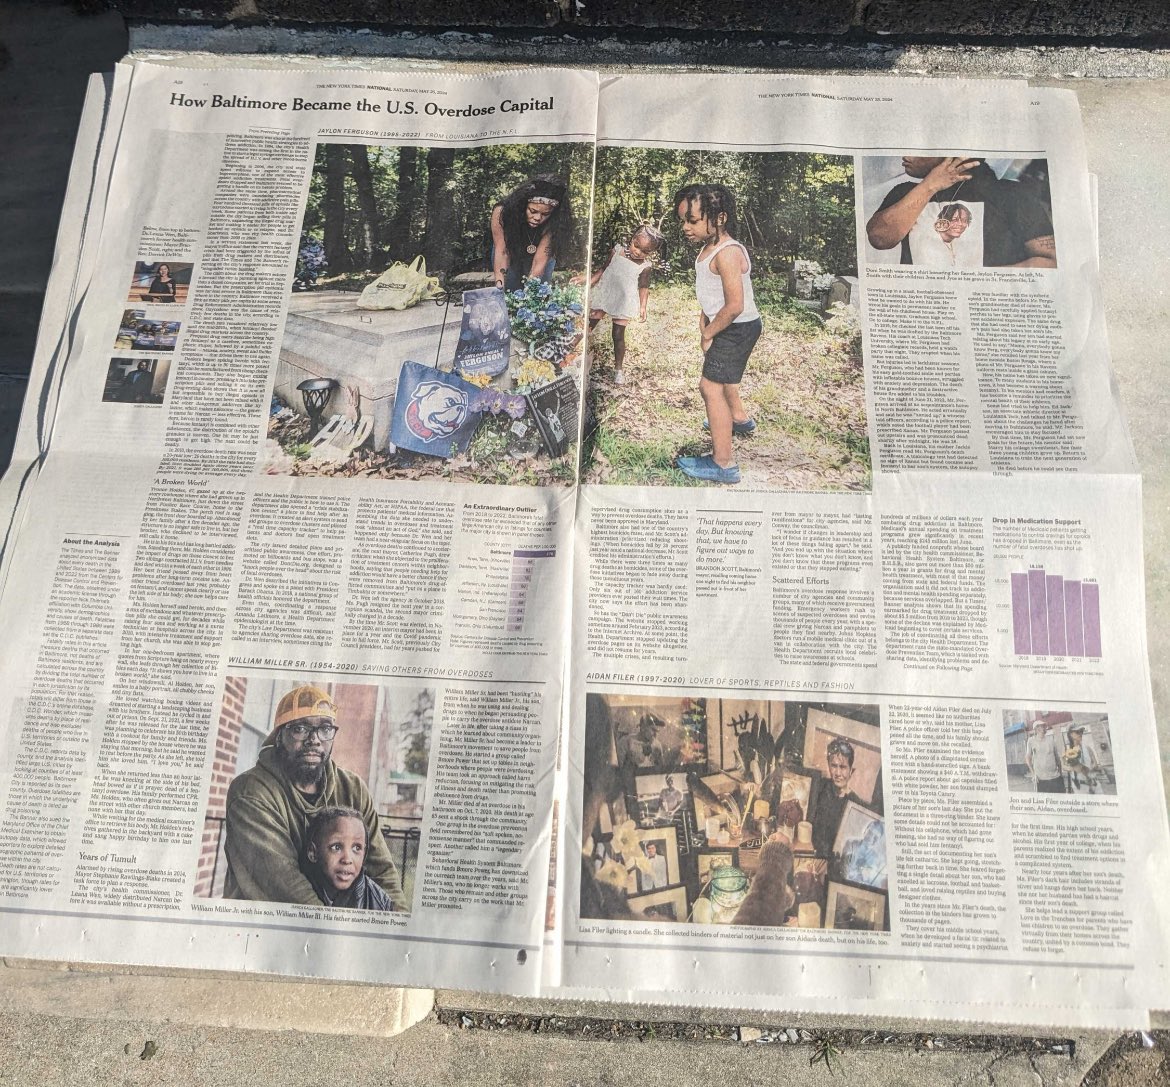 .@BaltimoreBanner investigation of opioid crisis in Baltimore is on the front page above the fold of today’s NYT, with four full inside pages. Keep an eye out for additional important stories to come that grew out of the reporting